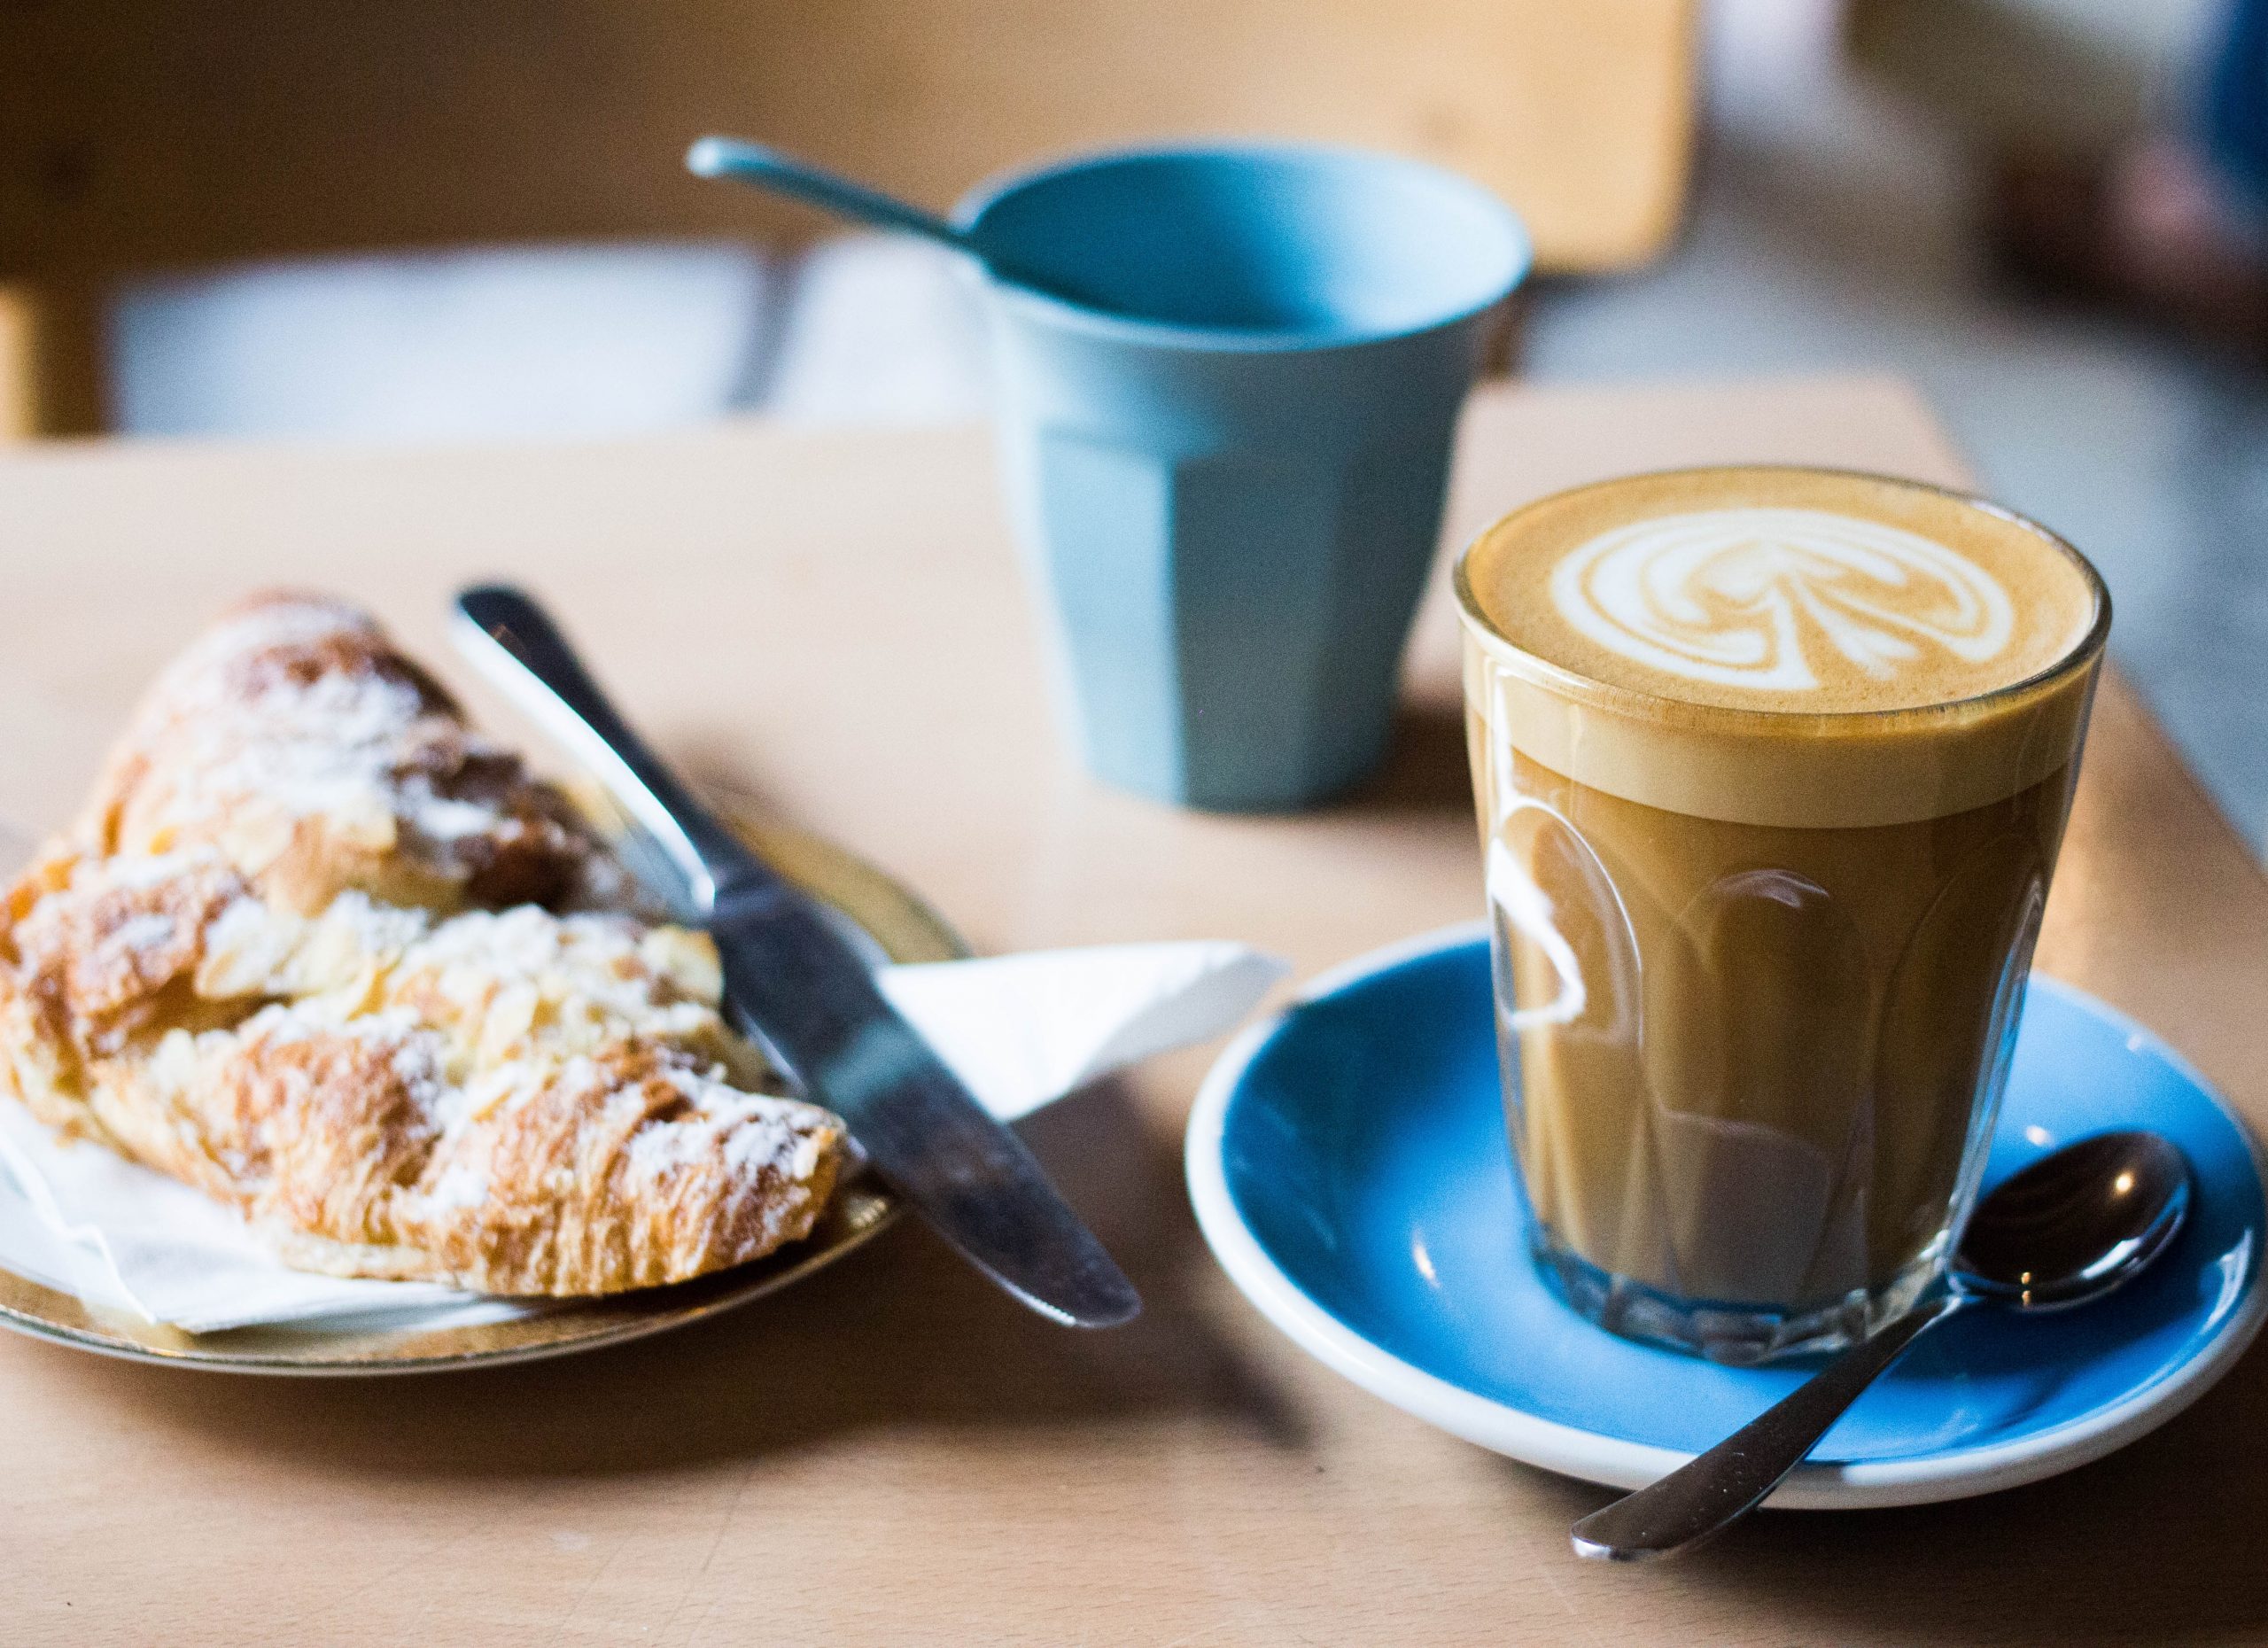 Find The Best Madrid Cafe For You Among These Freshly Brewed Picks